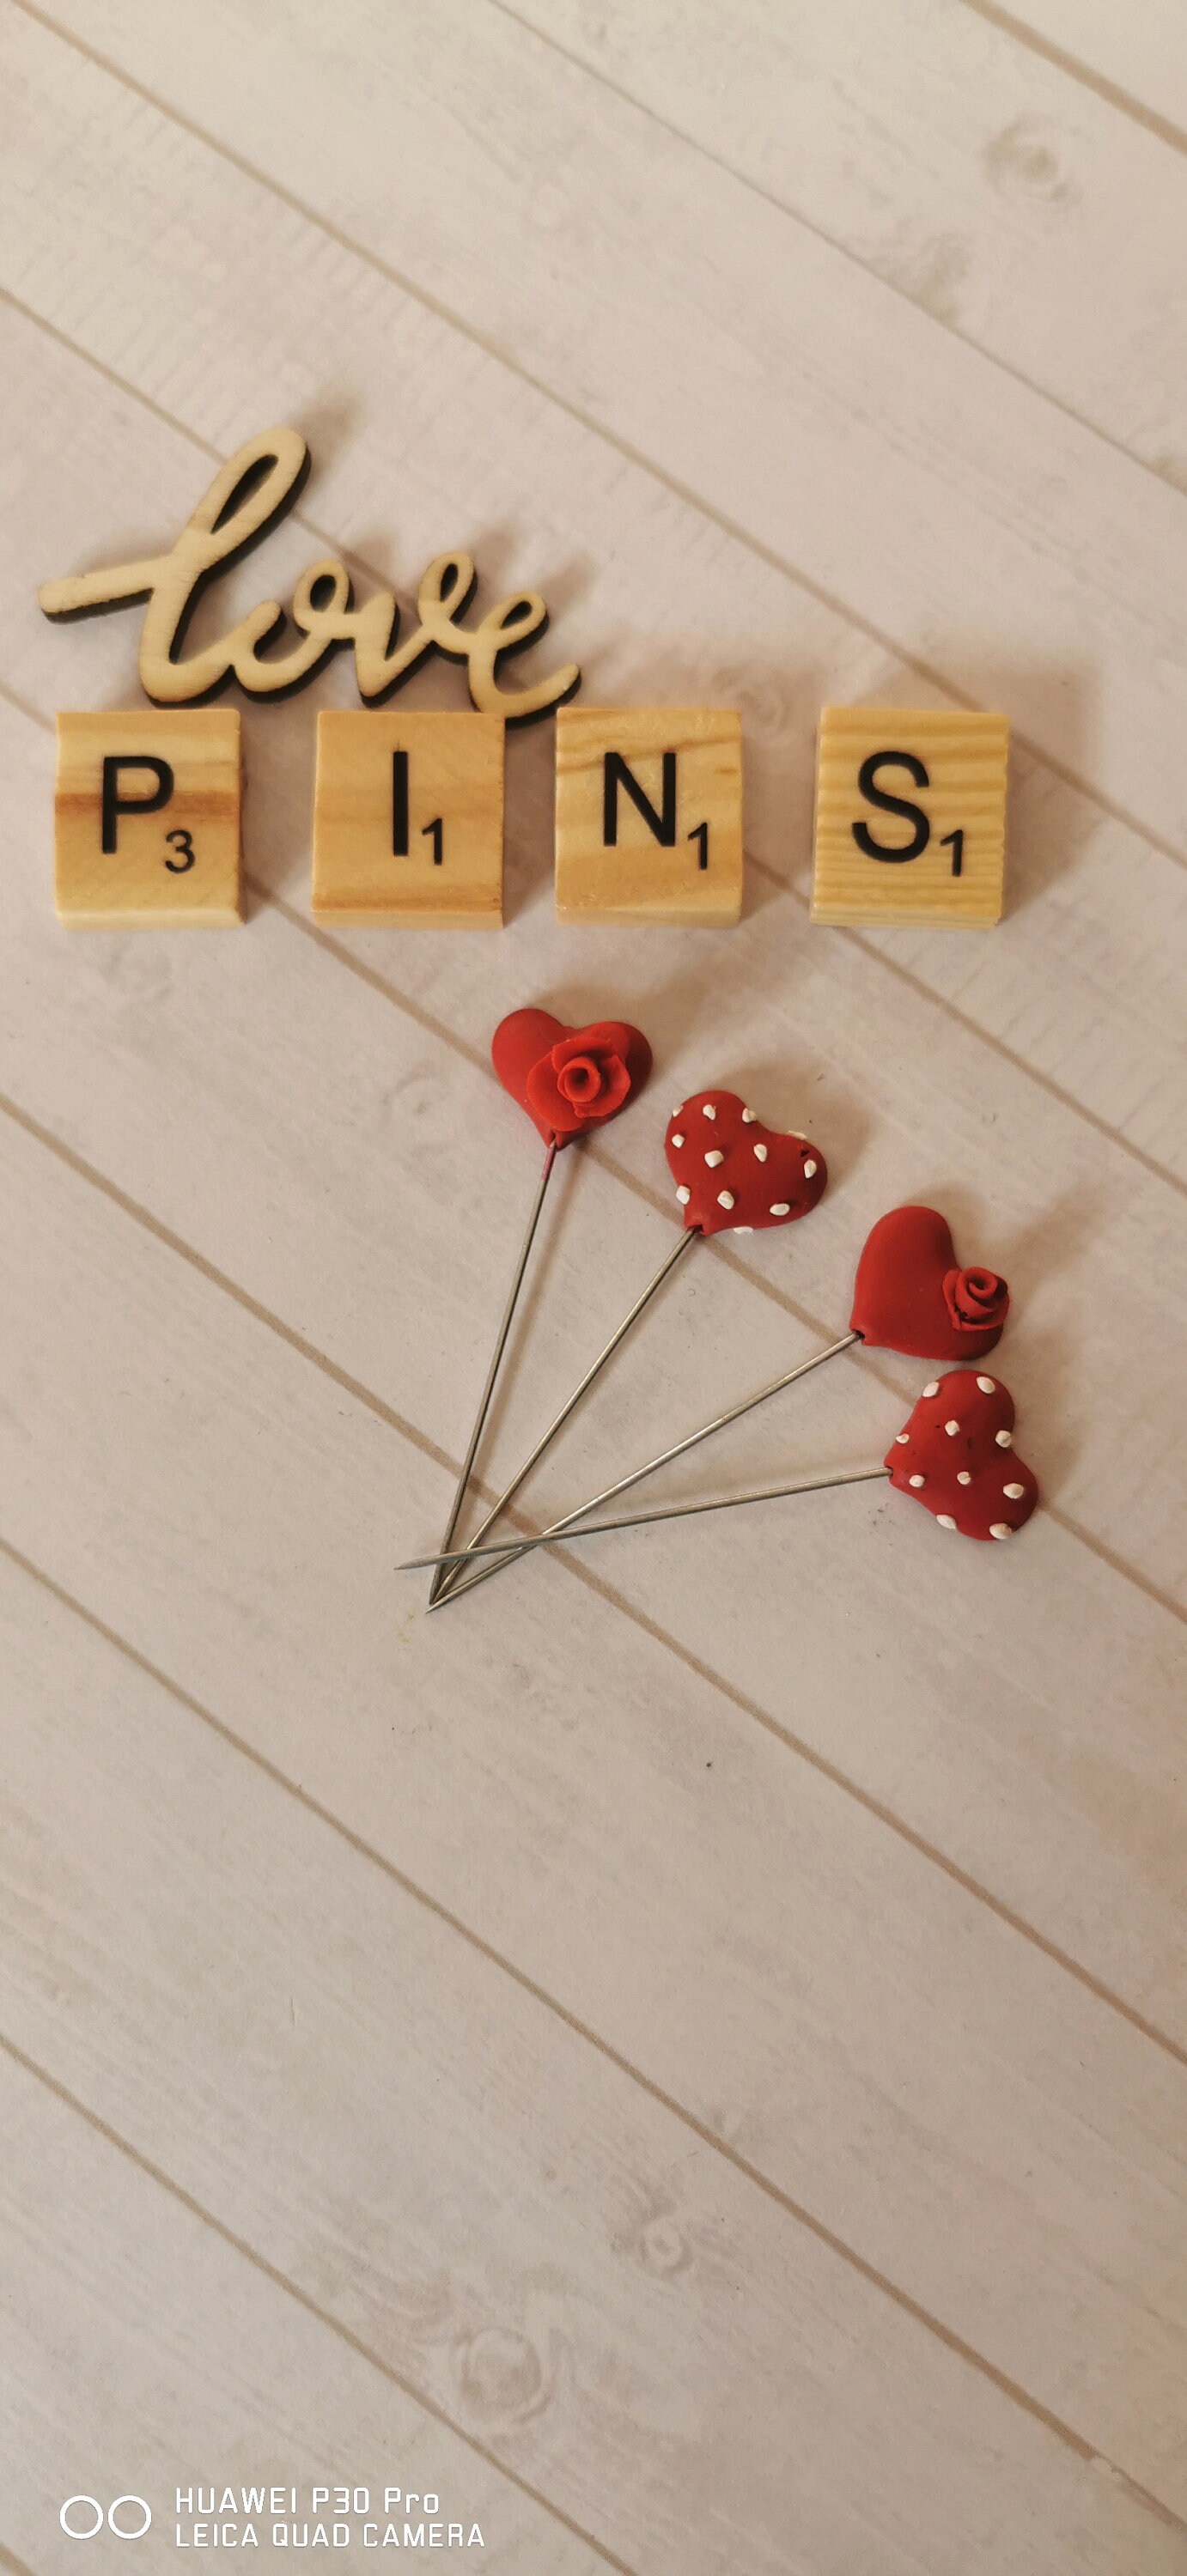 Cute Sewing Pins Gifts for Quilter Decorative Pins Pretty Pins